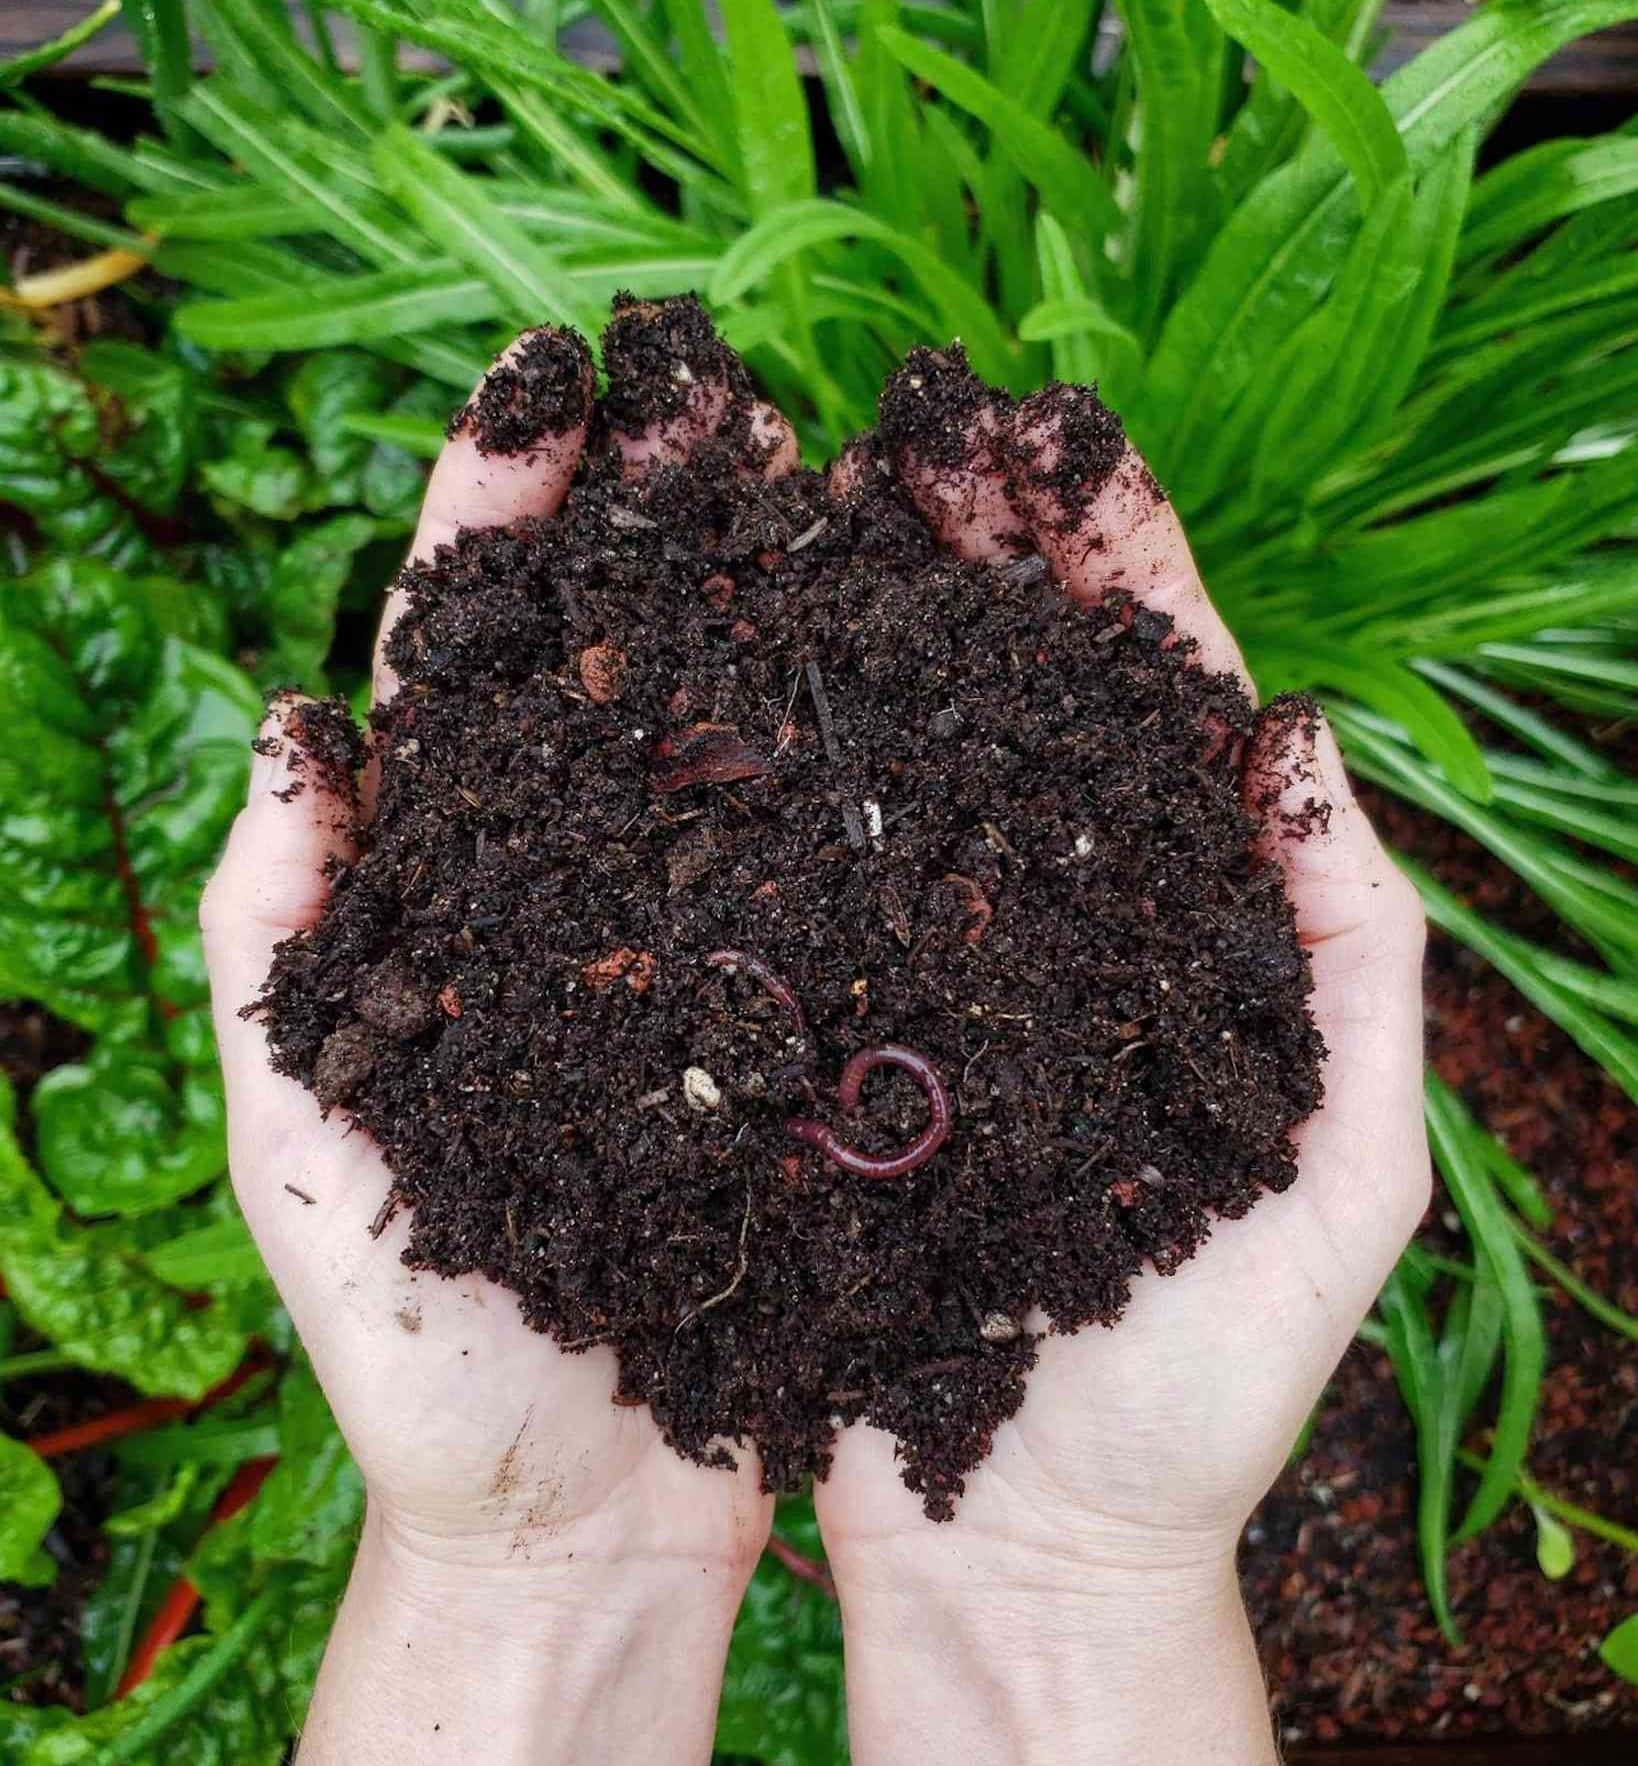 Two hands cupping rich brown organic soil with a few red worms, hovering over a garden bed with leafy greens in the background below.  